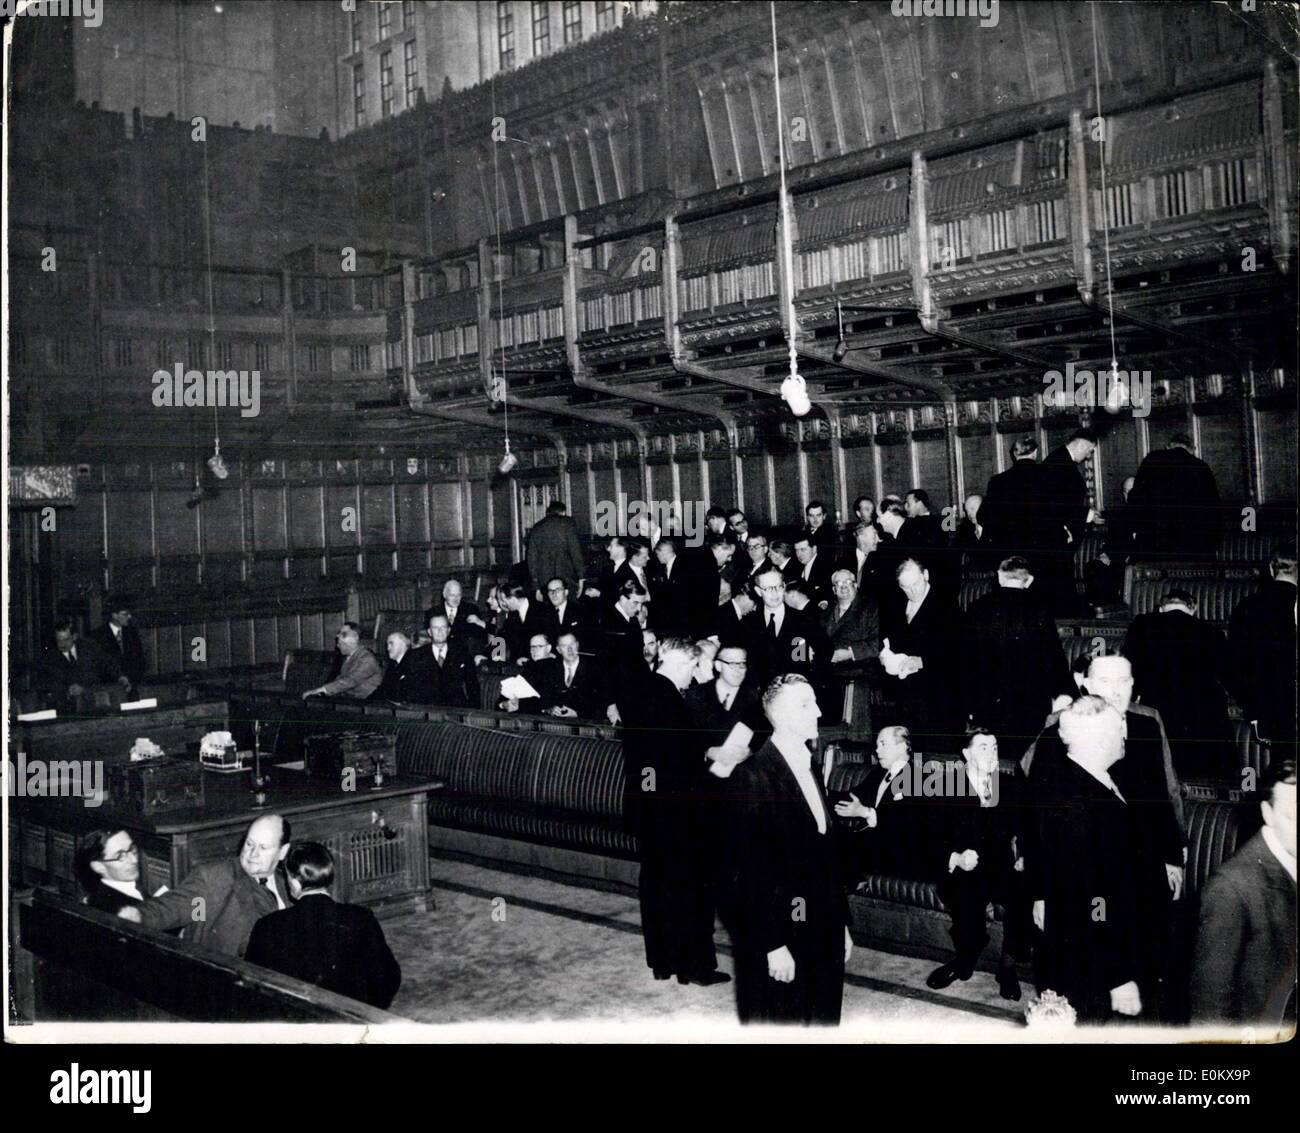 Oct. 30, 1950 - Scene Inside The House Of Commons Before Opening Of The New Chamber. Historic Photograph: This historic photograph shows the Chamber of the new House of Commons - with members in their seats - prior to the official ceremony of opening the new House of Commons by H.M. The King. The opportunity of making a similar photograph has not occurred before and may never occur again. The occasion was the scramble to reserve seats after the Sergeant at Arms had unlocked the door at 8. a.m. this morning in readiness for the ceremonies Stock Photo